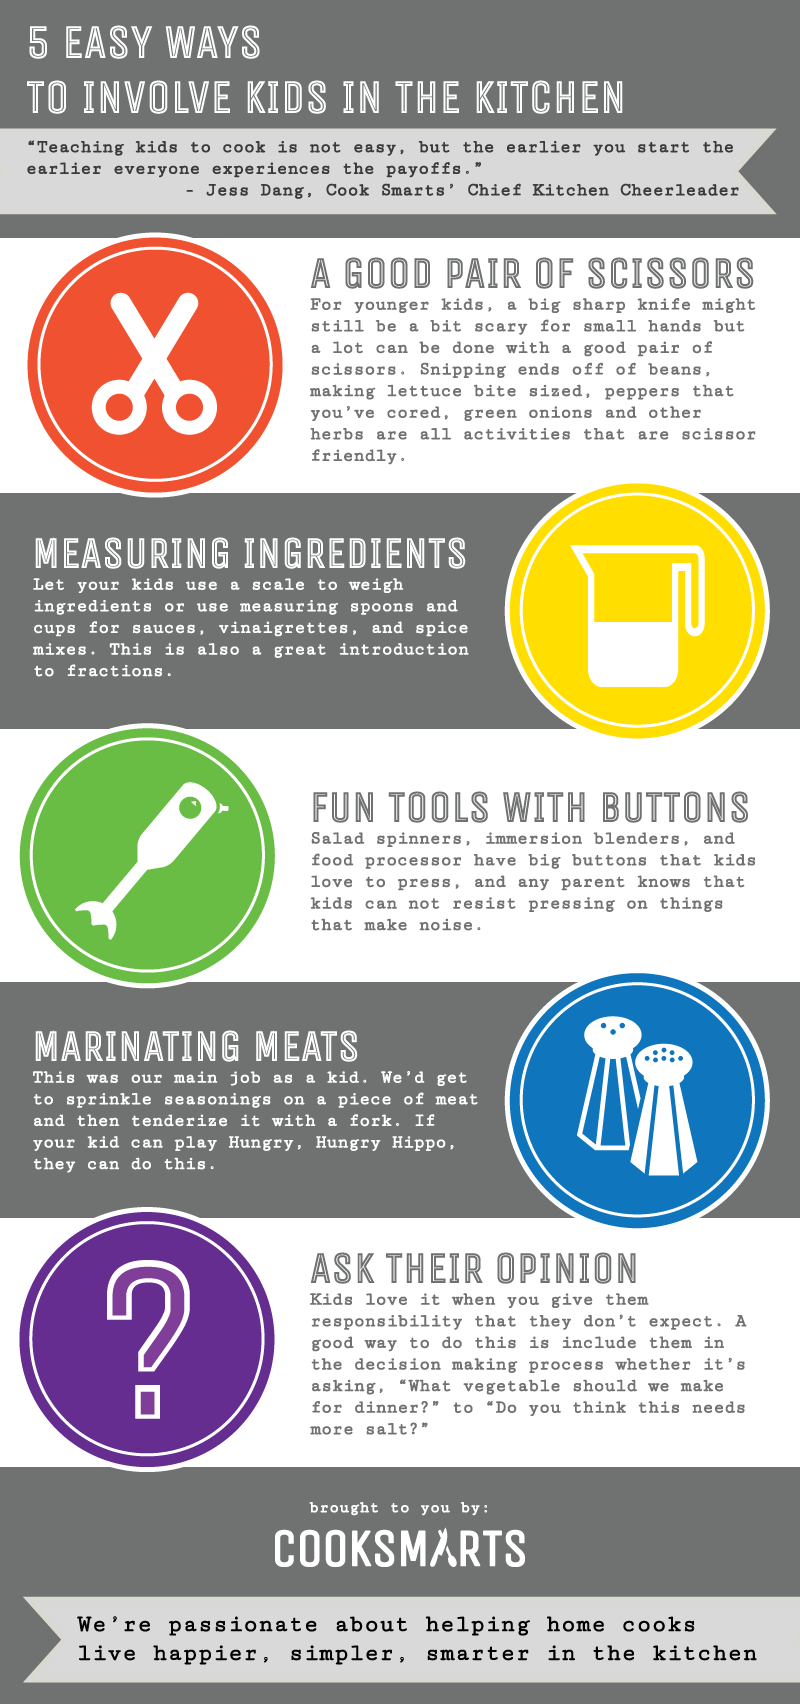 5 Ways to Involve Kids in the Kitchen by @cooksmarts #infographic